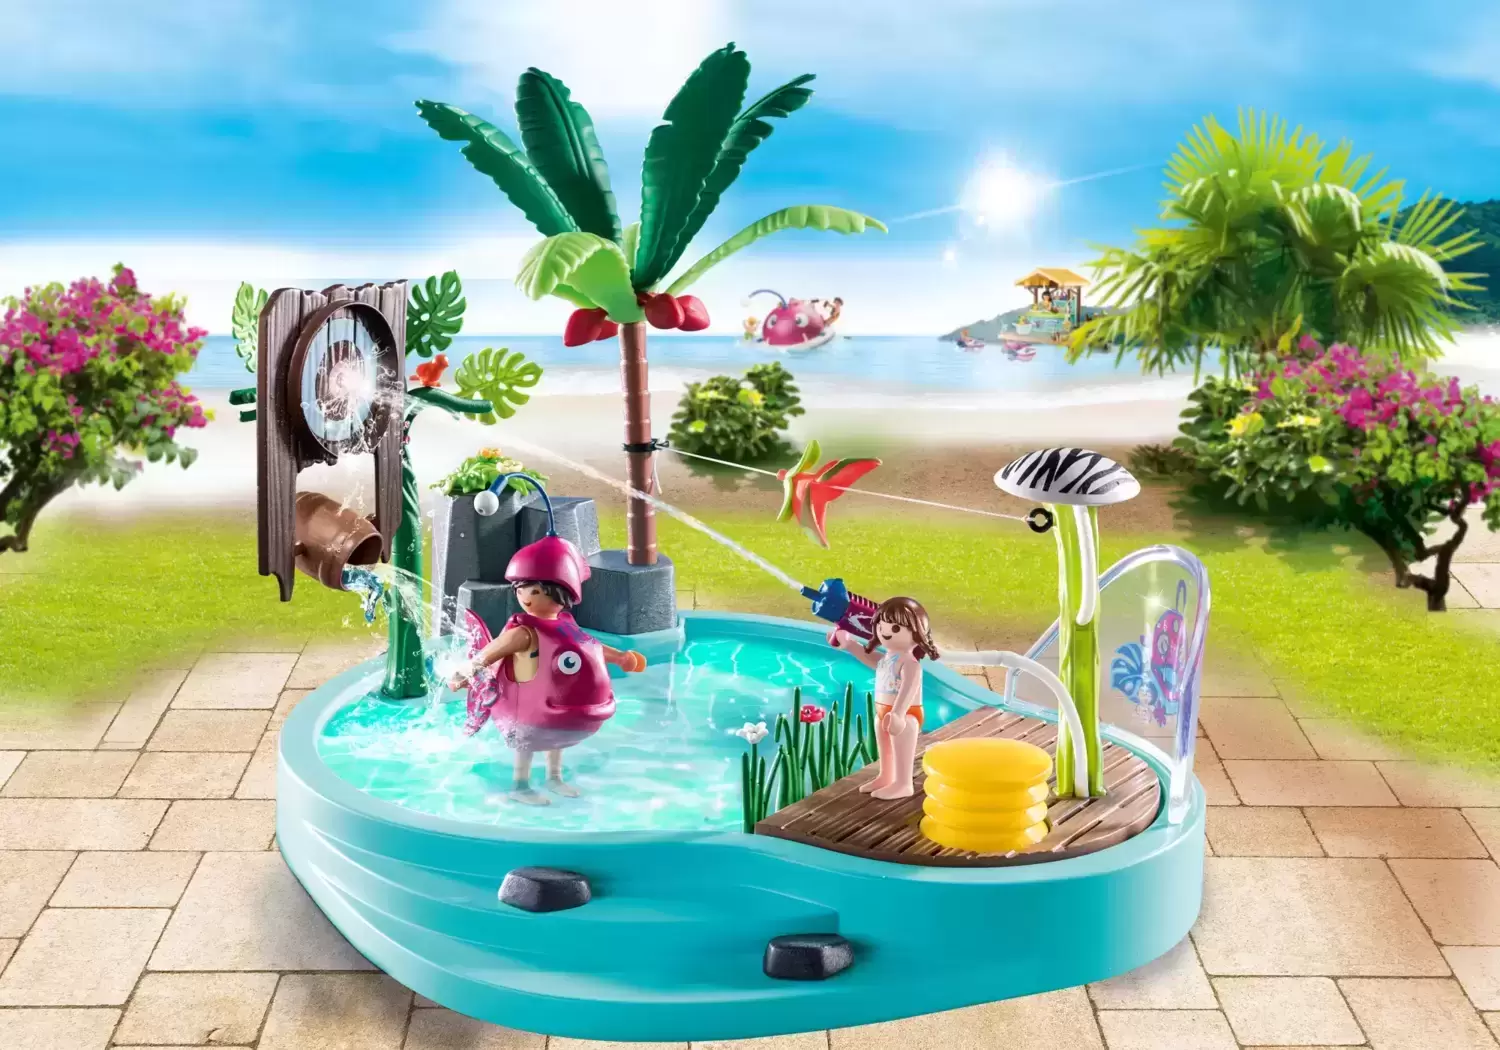 Playmobil on Hollidays - Small Pool with Water Sprayer